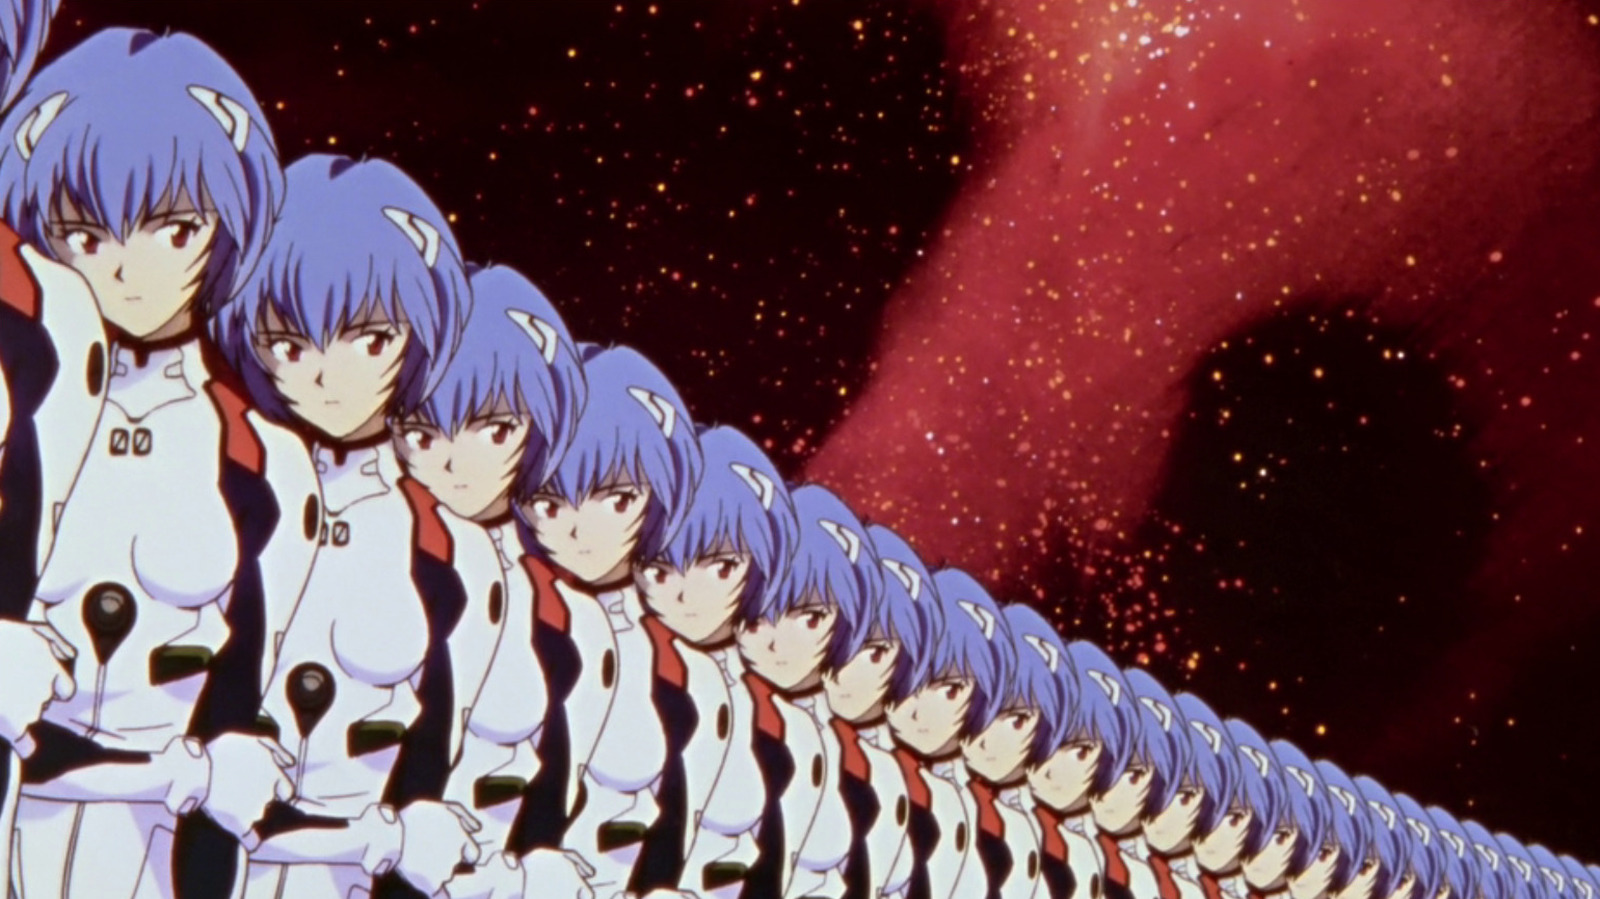 How To Watch Neon Genesis Evangelion In Right Watching Order?, by Vocal  How To, Vocal logs